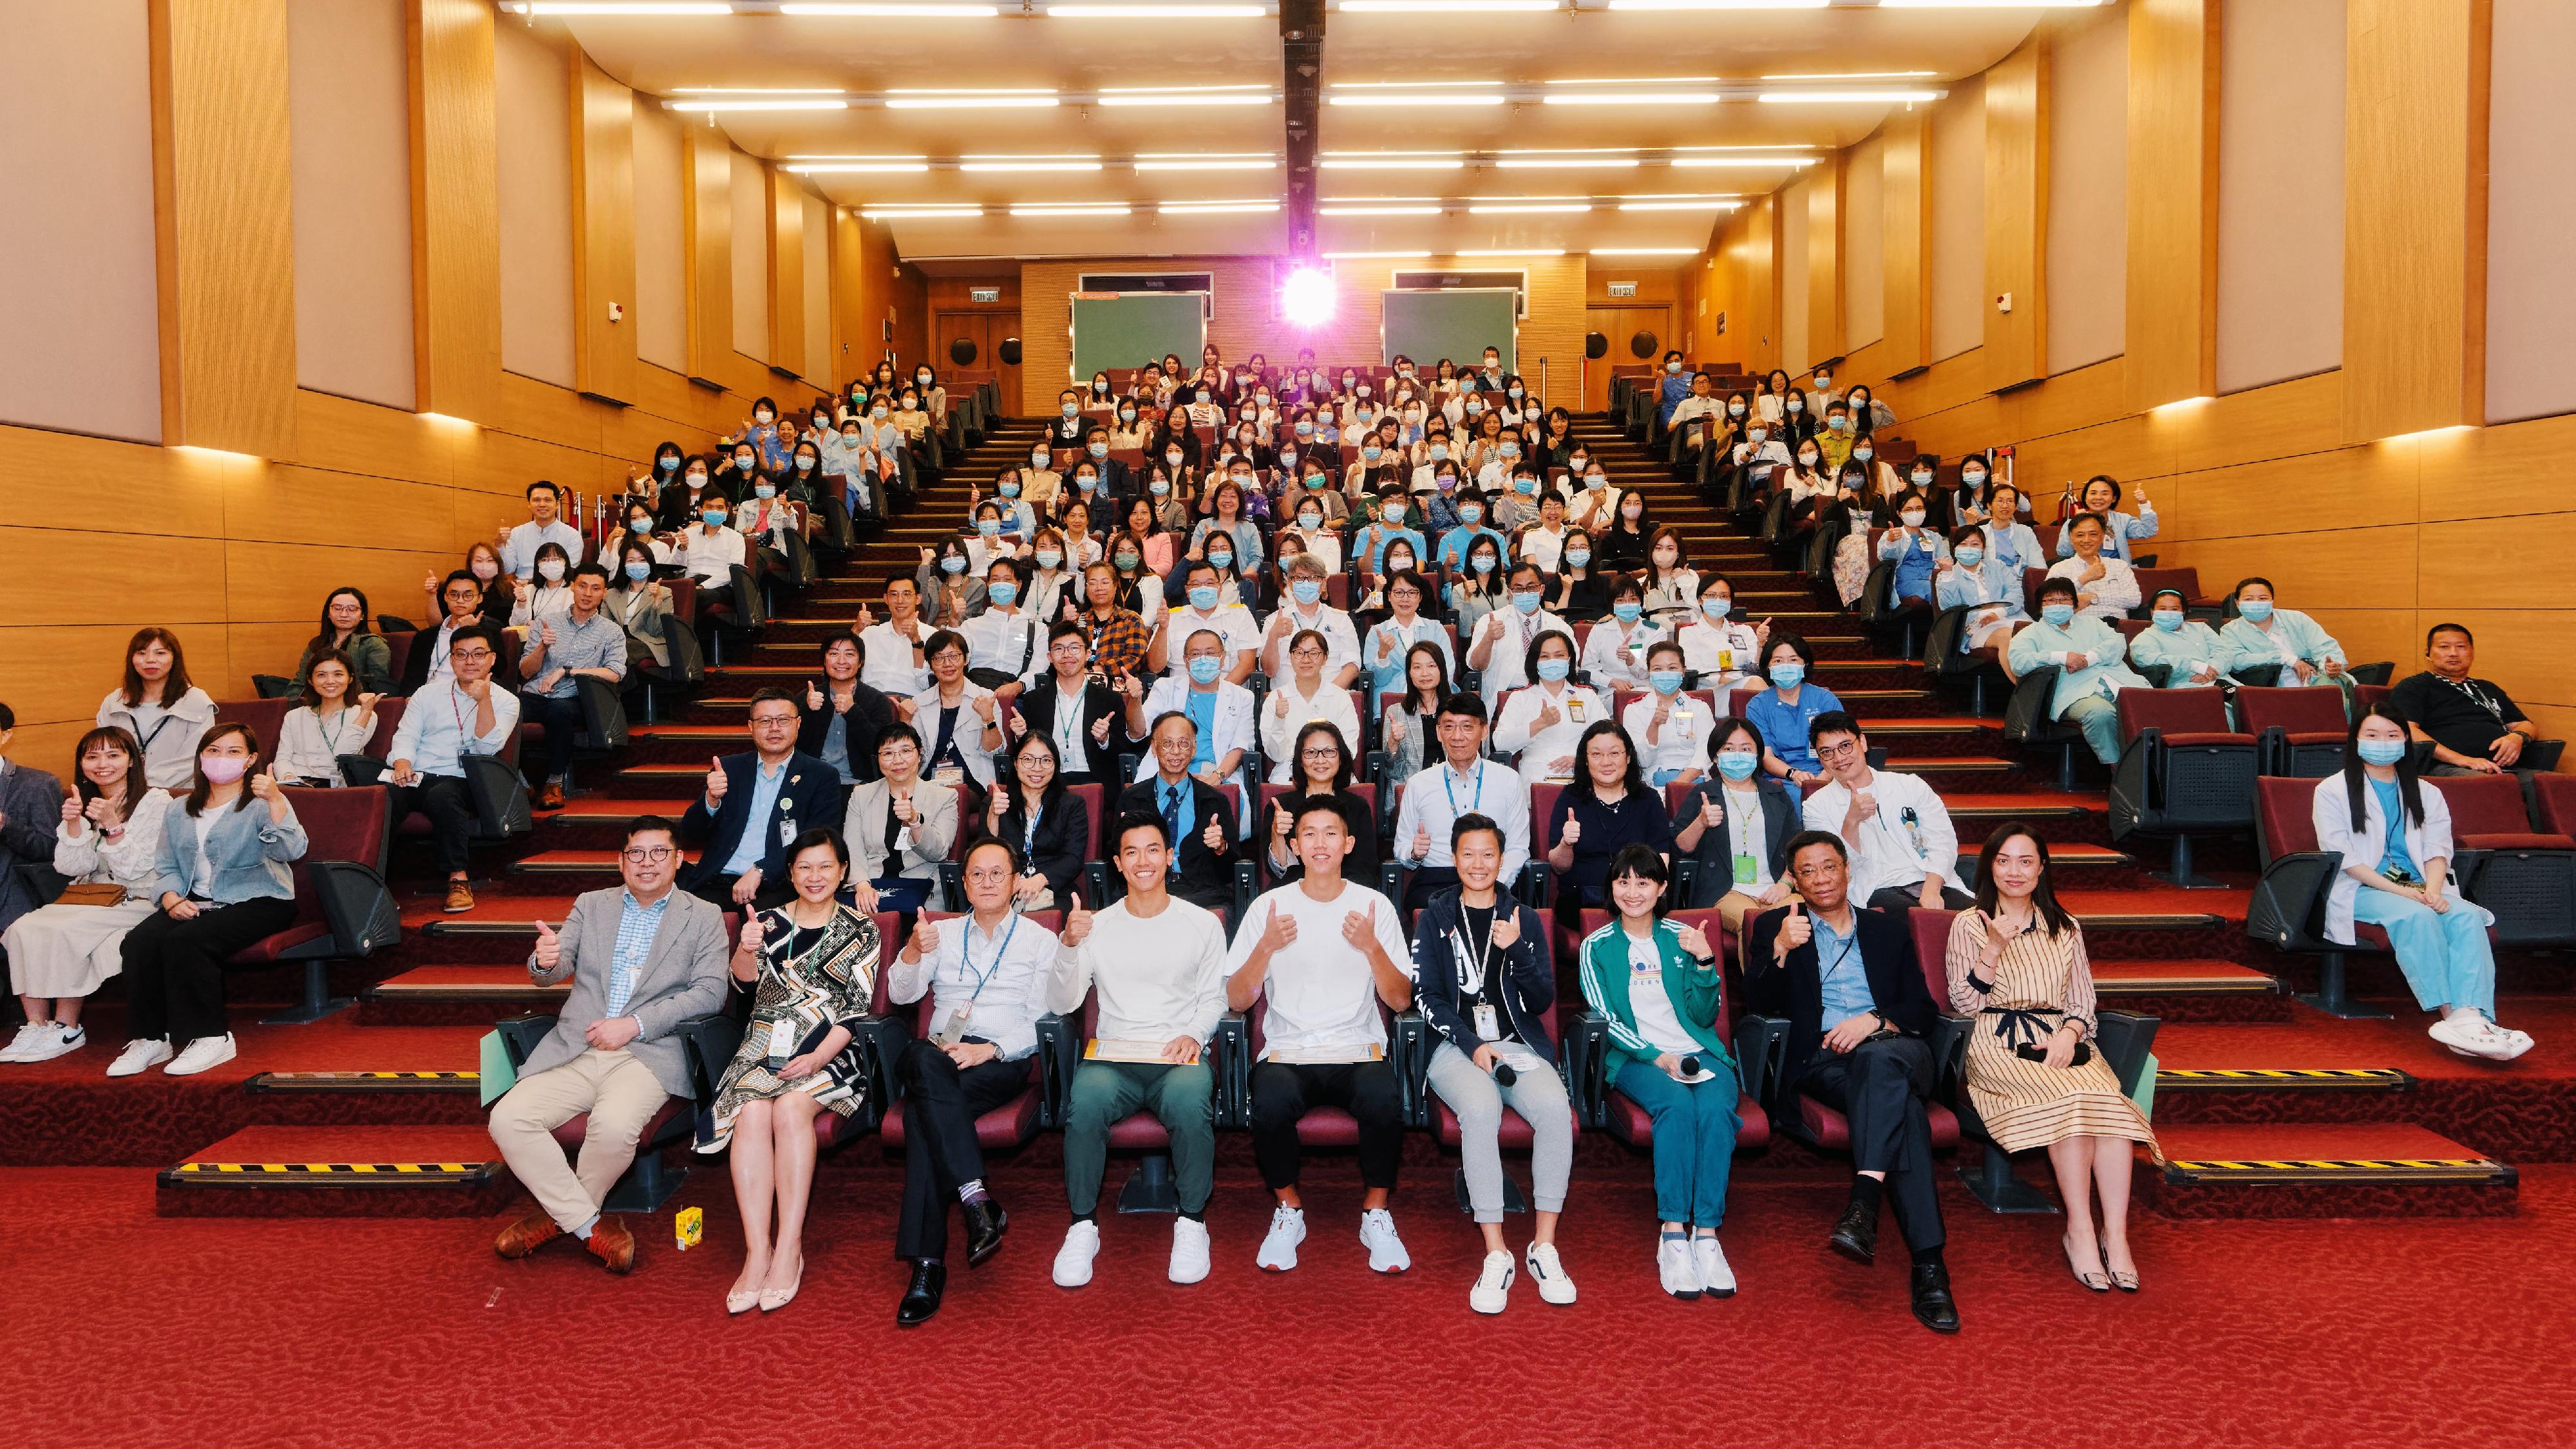 Lam San-tung (first row, fourth left) and Wong Wai-chun (first row, fifth left), who won the gold medal in Rowing Men's Coxless Pairs in the 19th Asian Games Hangzhou, attended a sharing session held at Princess Margaret Hospital on November 13 to share their journey and behind-the-scenes moments of winning the gold medal in the Asian Games.